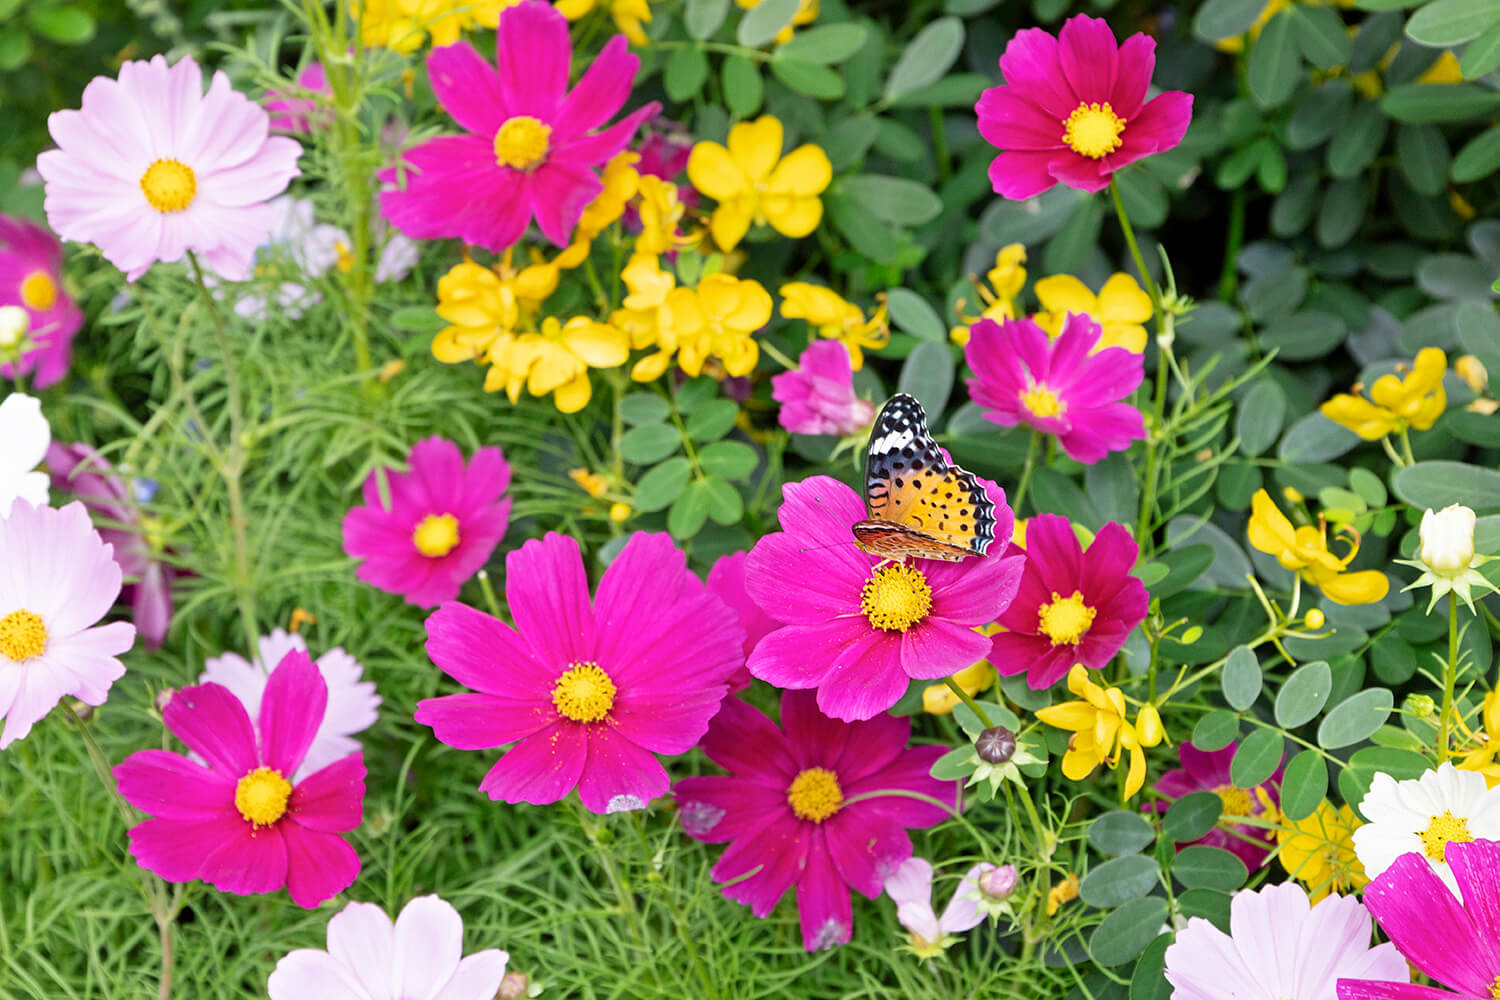 A butterfly alights gently in a field of vivid cosmos flowers under autumn skies. (Tokyo, October 2022)